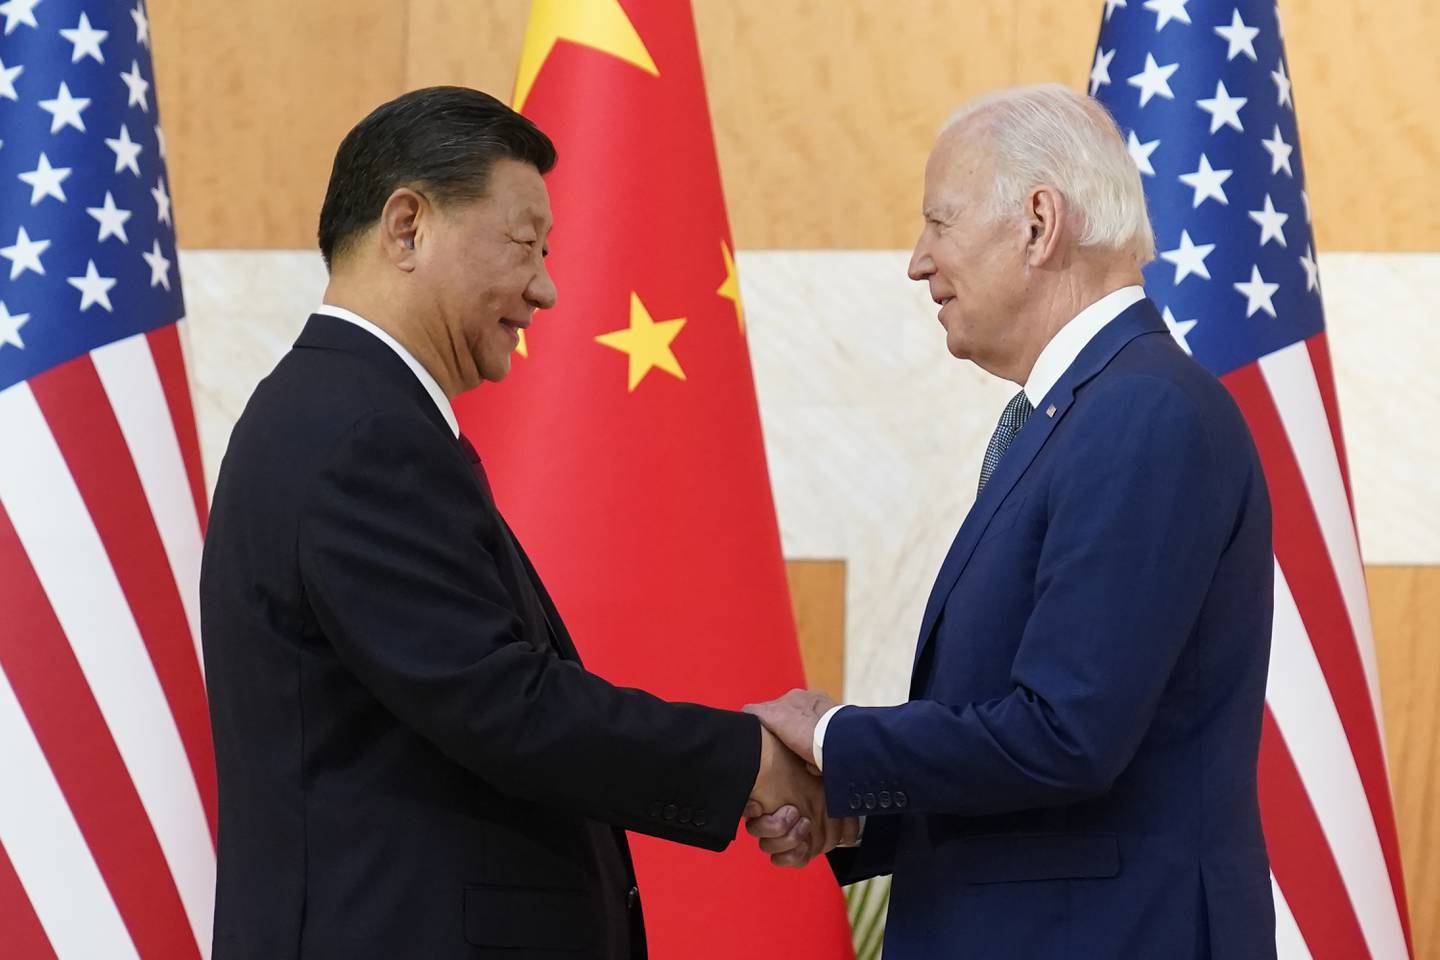 US President Joe Biden, right, and Chinese President Xi Jinping shake hands at the G20 summit in November. AP Photo